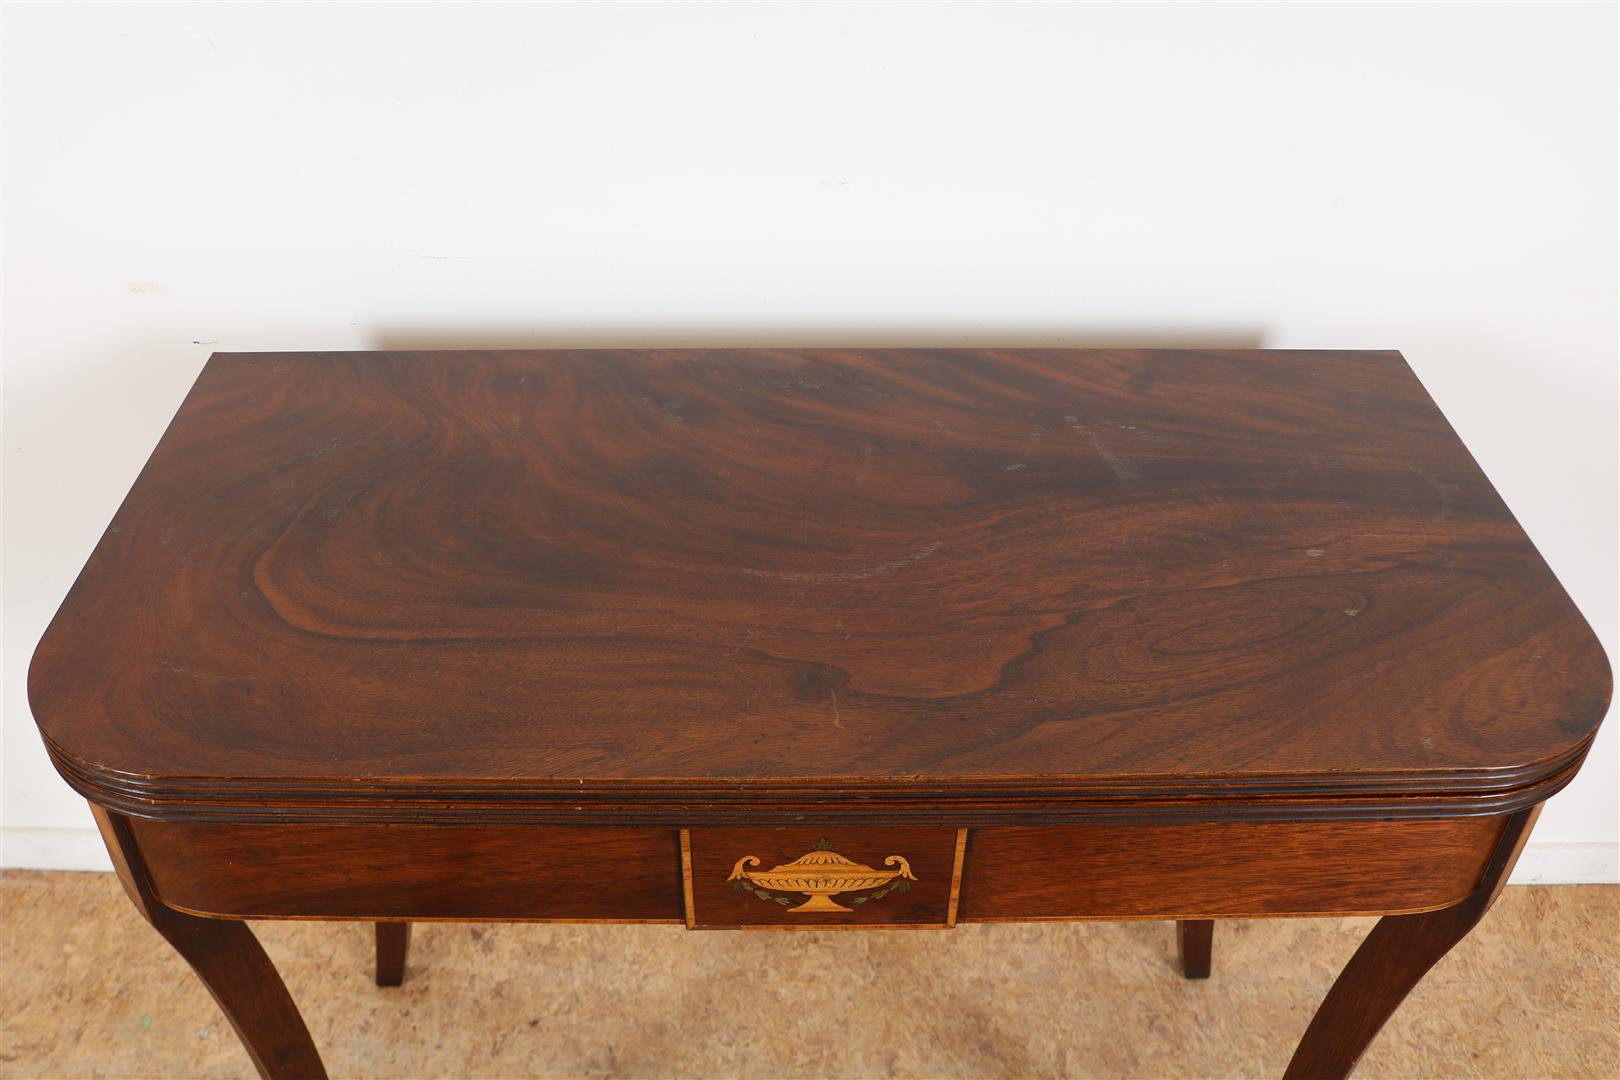 Mahogany Georgian-style coffee/breakfast table with folding top, inlaid vase in skirting boards - Image 6 of 6